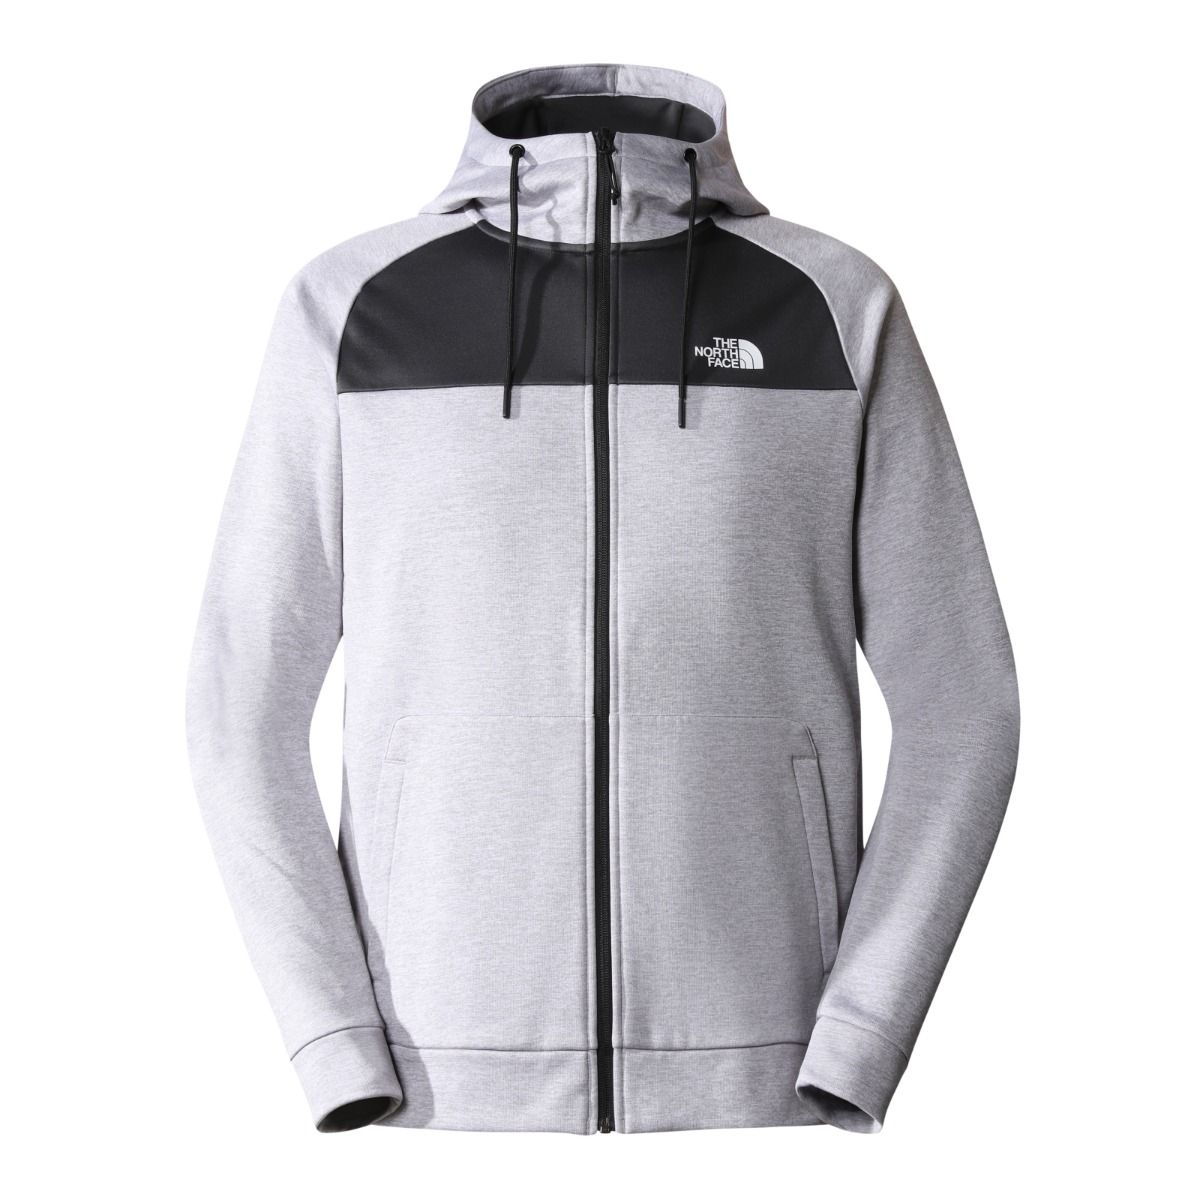 The North Face - M's REAXION FLEECE F/Z